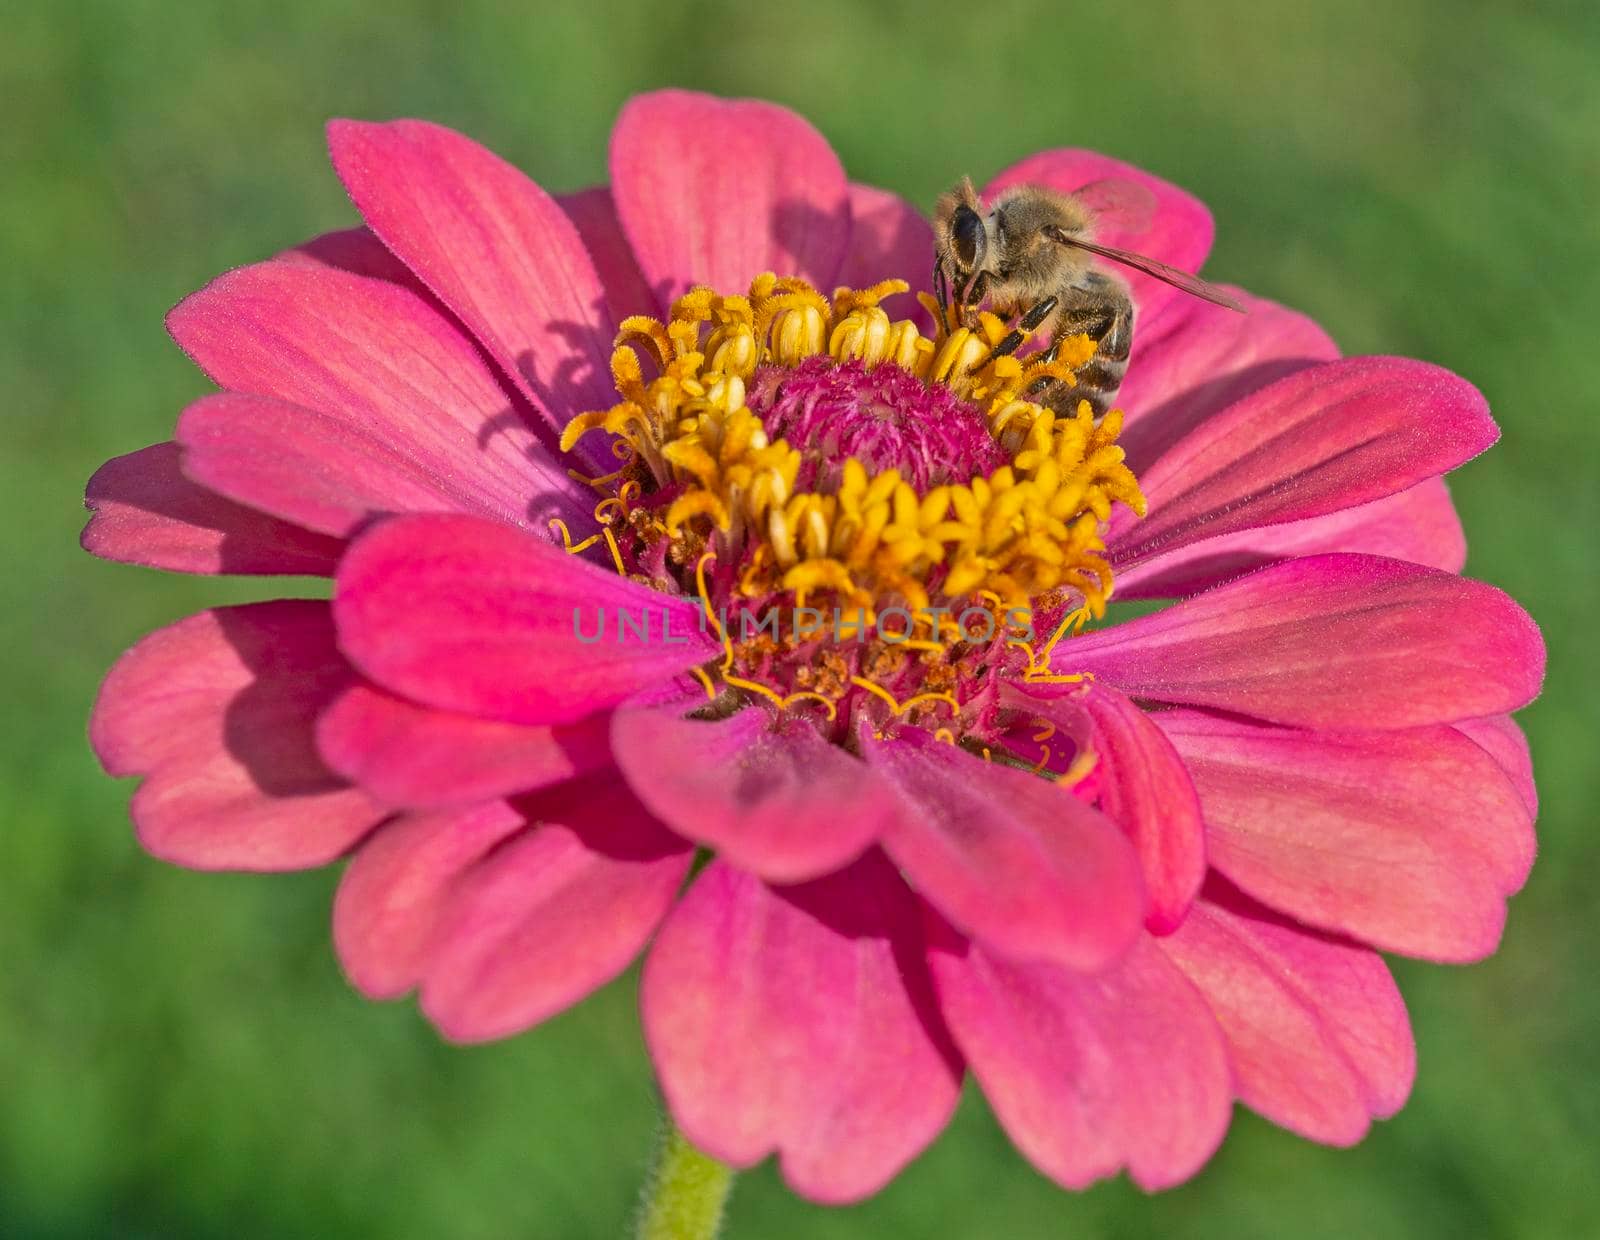 Close-up detail of a honey bee apis collecting pollen from stame on yellow and pink dahlia flower in garden